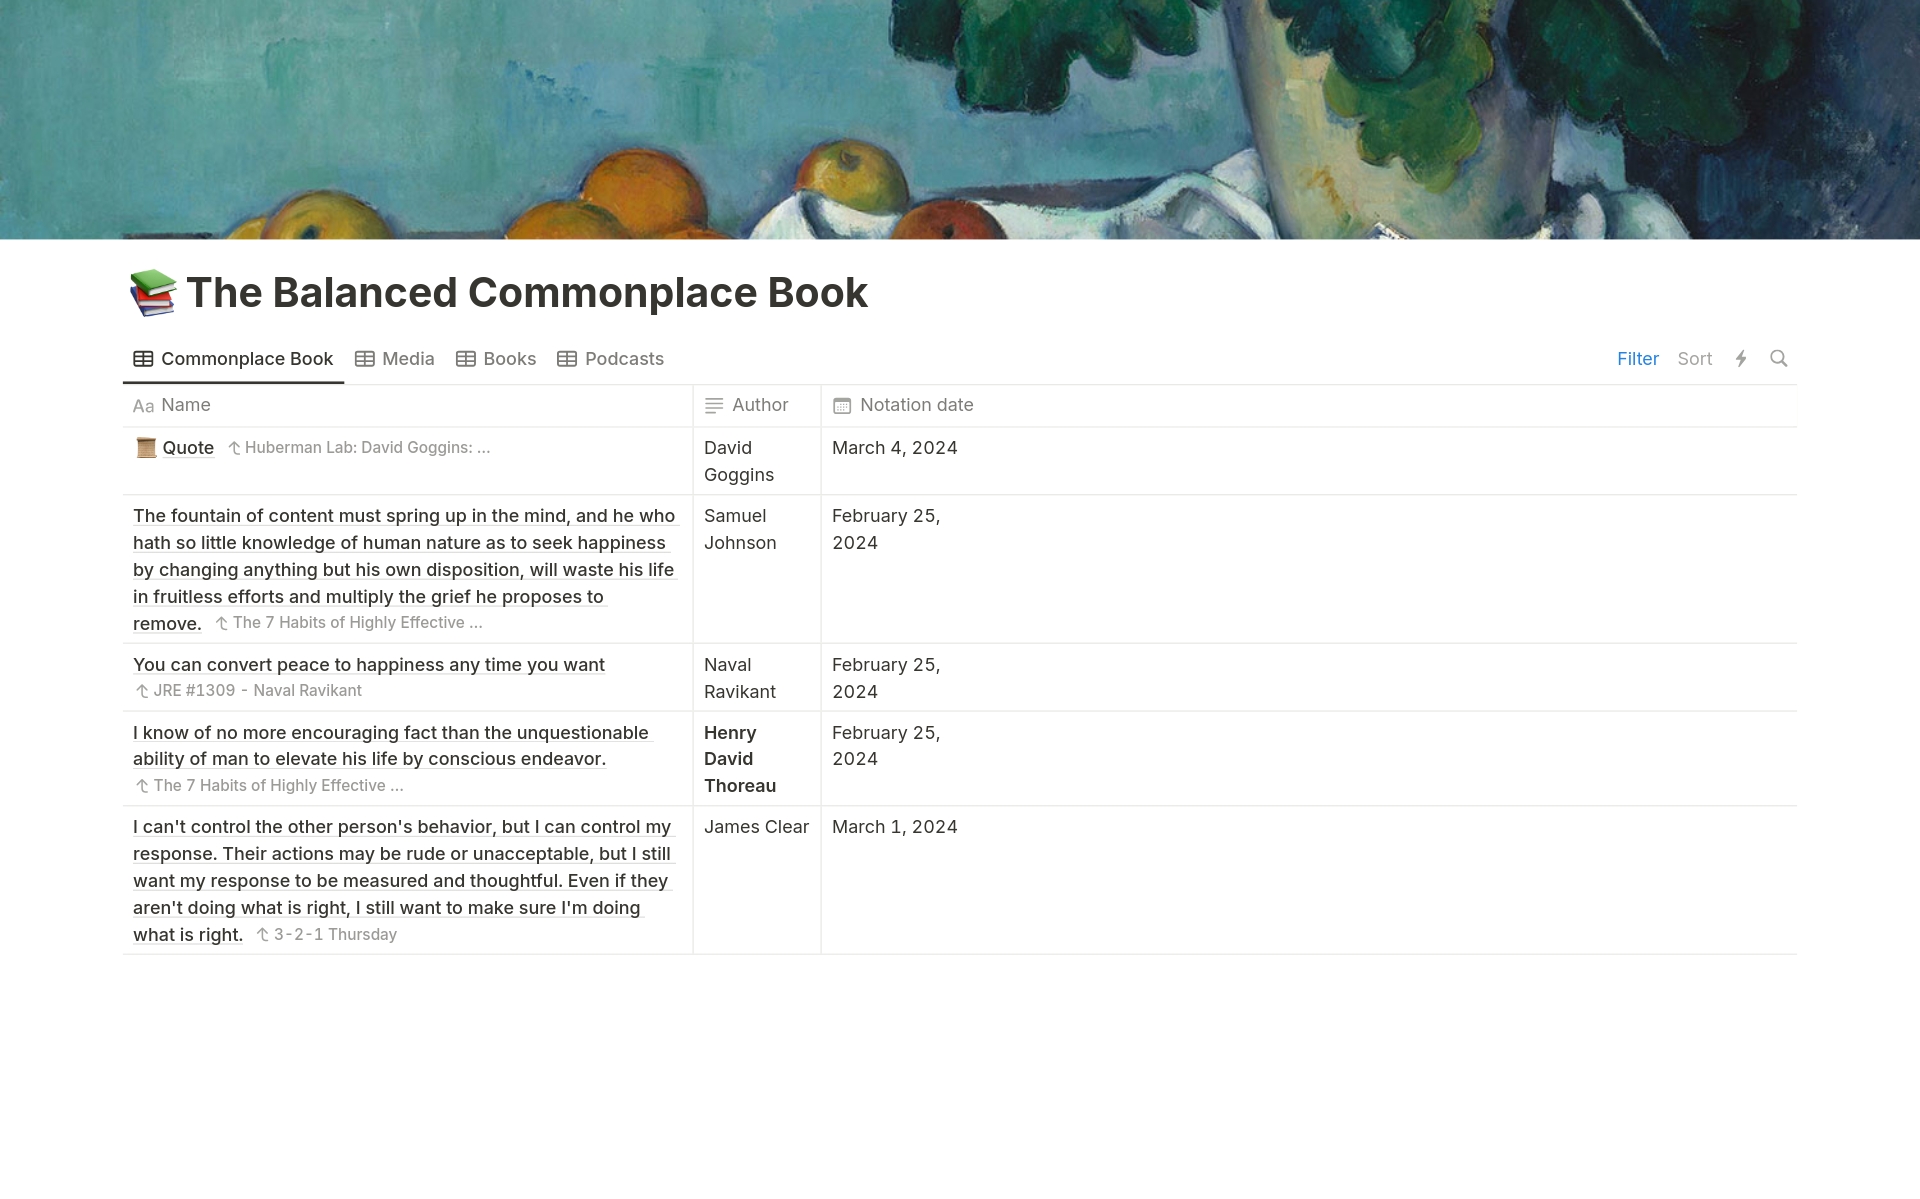 This is the ultimate commonplace book template for you. Have all your knowledge in one place. Add your quotes and link them to their source. Add different type of media. Personalize template for your self.